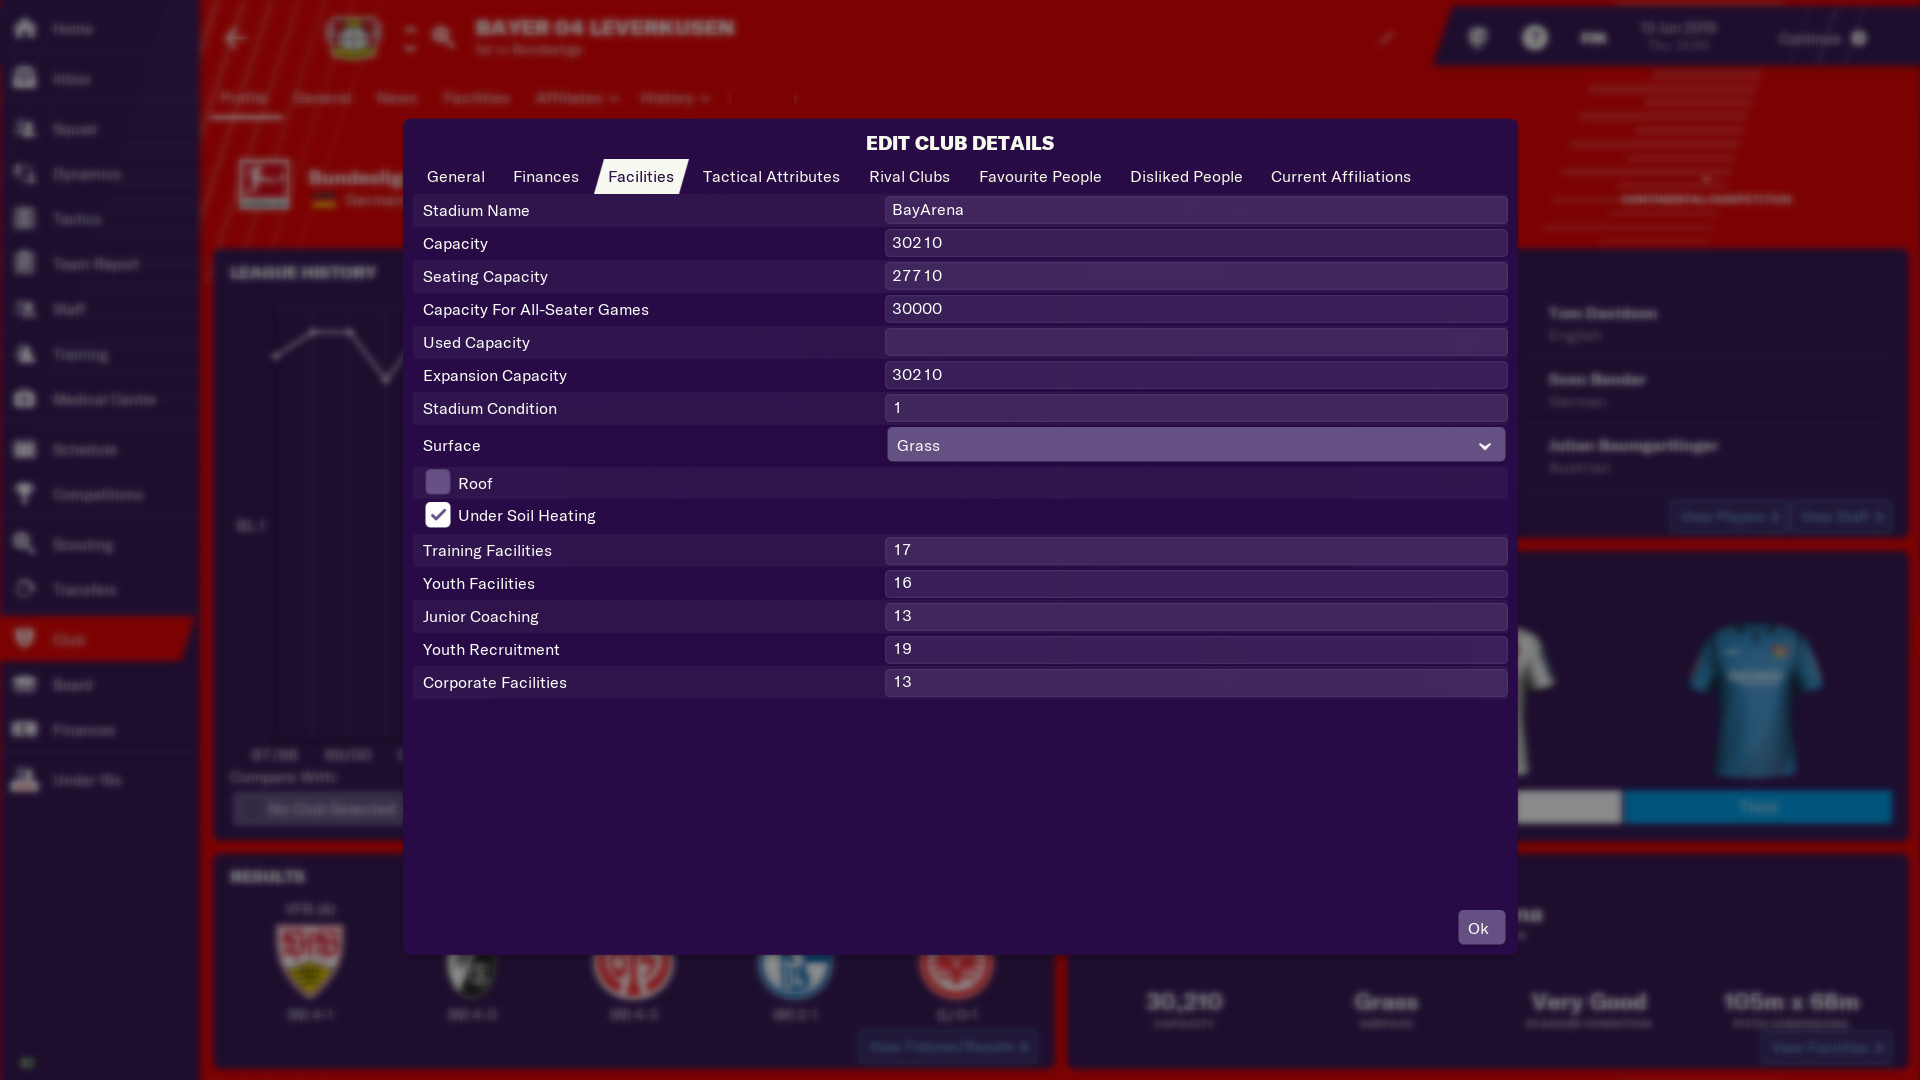 download free top football manager 2019